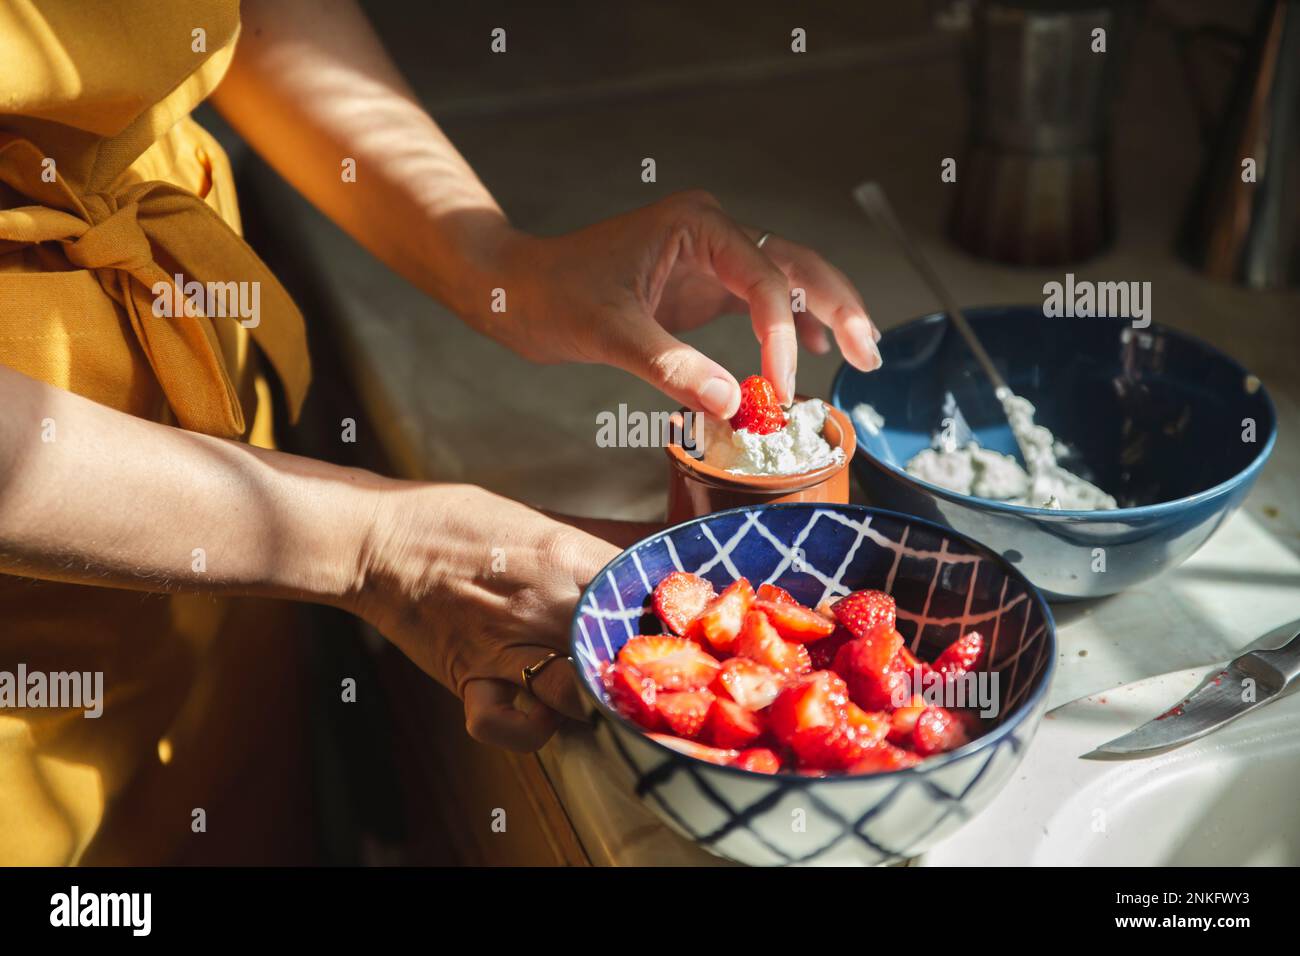 Hands of woman dipping strawberries in cream at kitchen Stock Photo